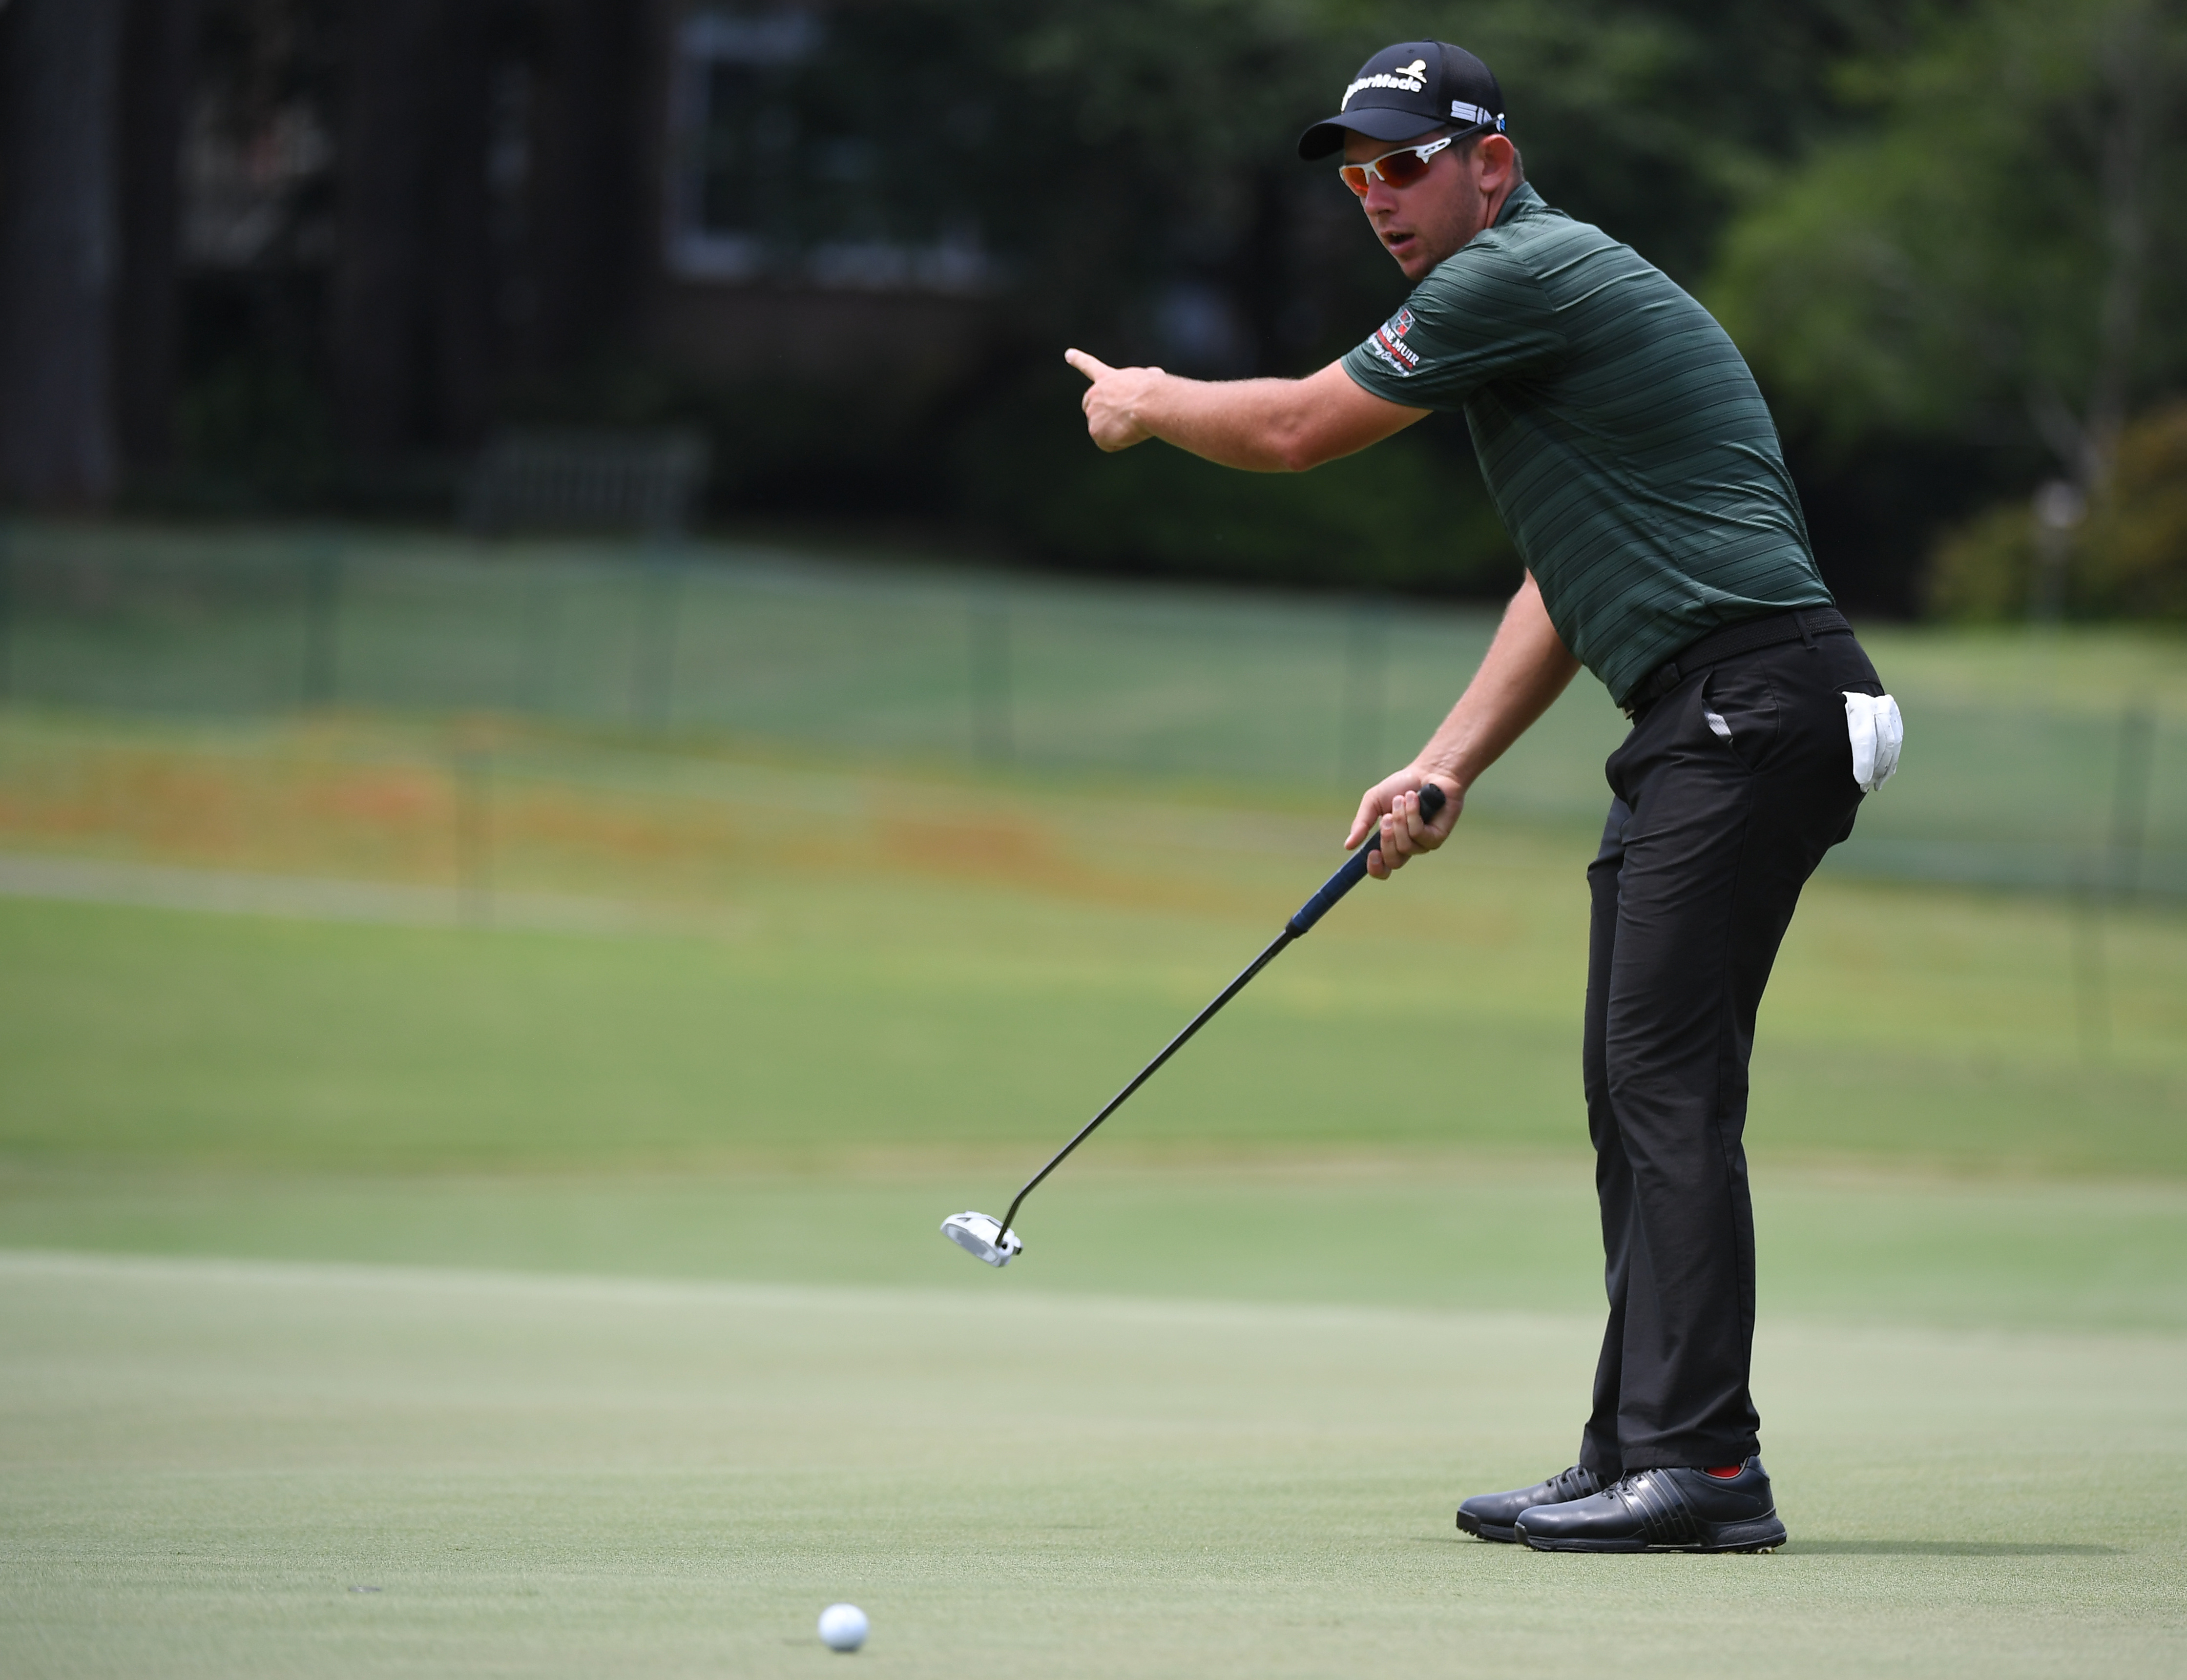 Aug 5, 2021; Memphis, Tennessee, USA; Lucas Herbert reacts to missing a putt on the 13th hole during the first round of the WGC FedEx St. Jude Invitational golf tournament at TPC Southwind. Mandatory Credit: Christopher Hanewinckel-USA TODAY Sports